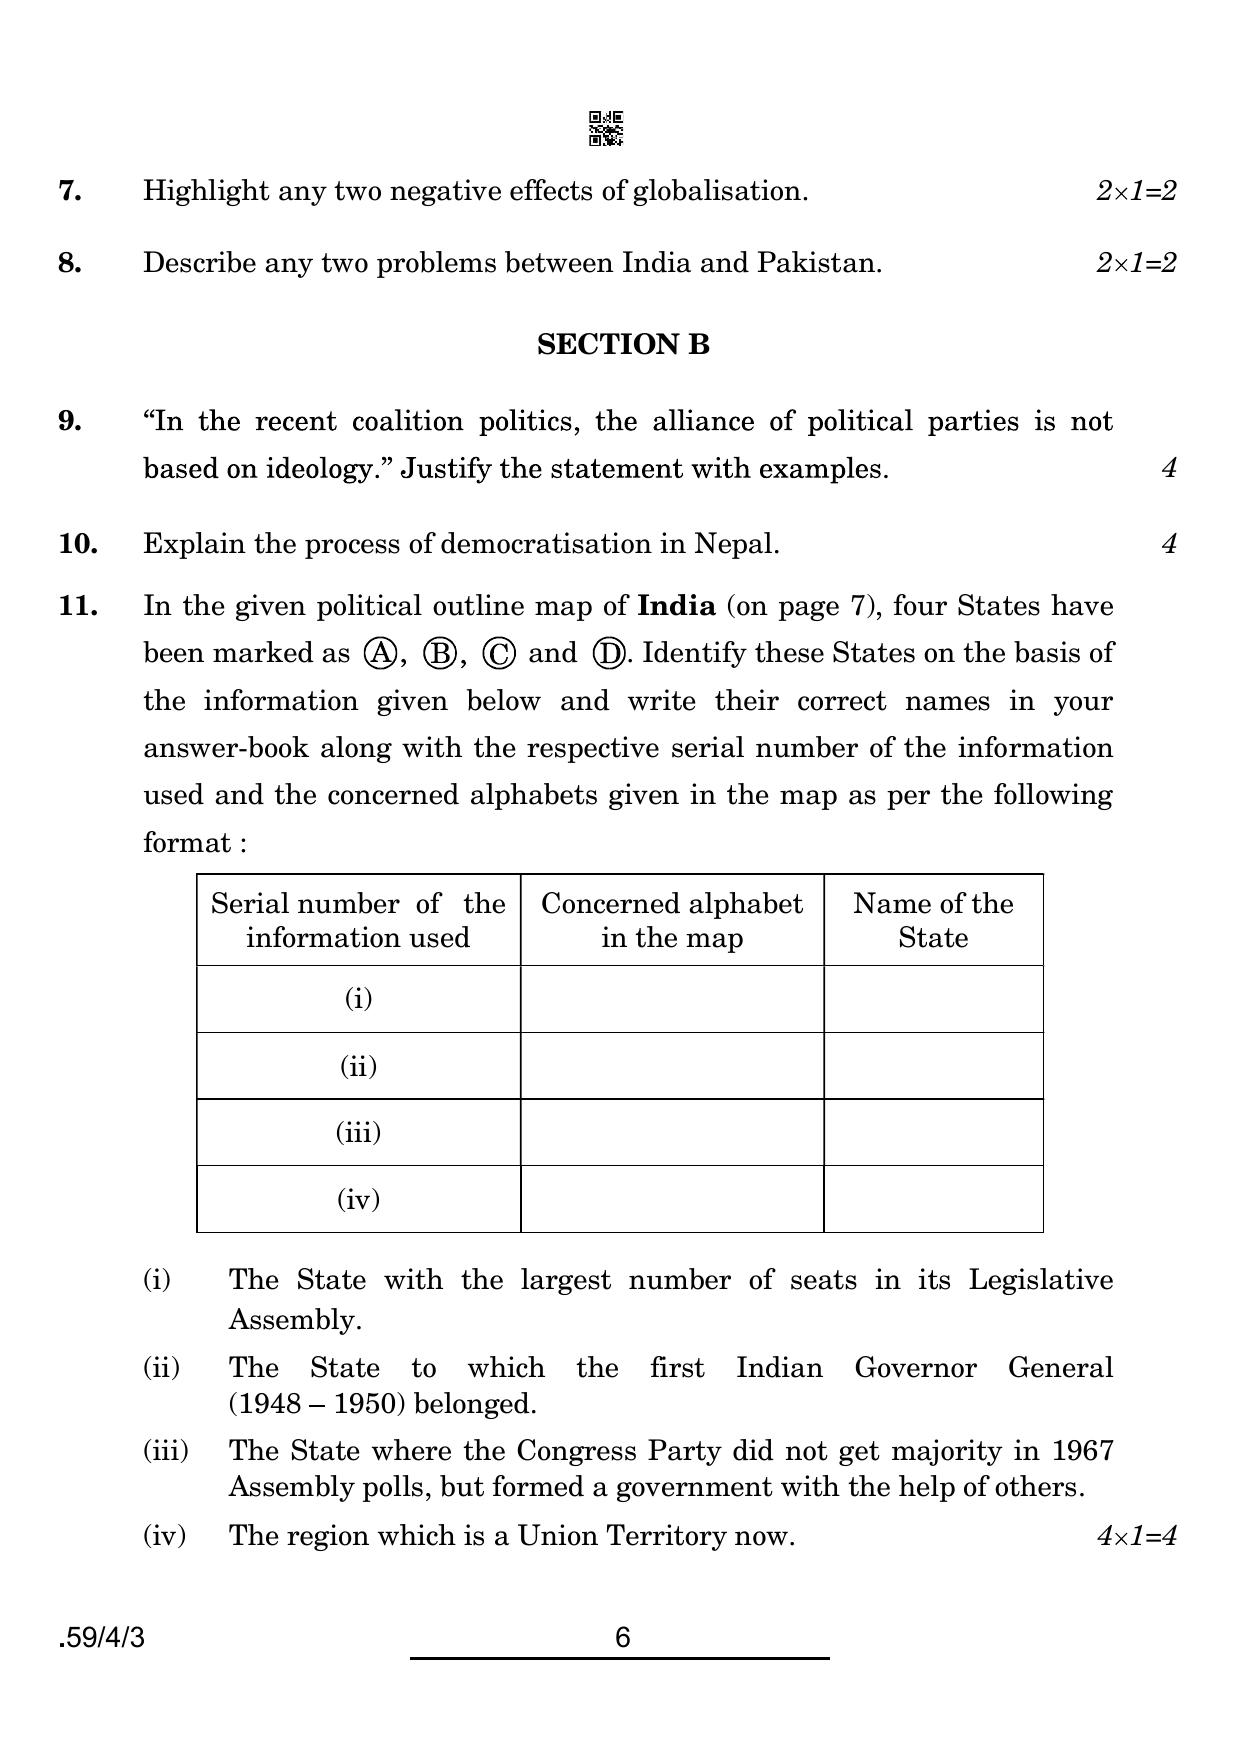 CBSE Class 12 59-4-3 Political Science 2022 Question Paper - Page 6